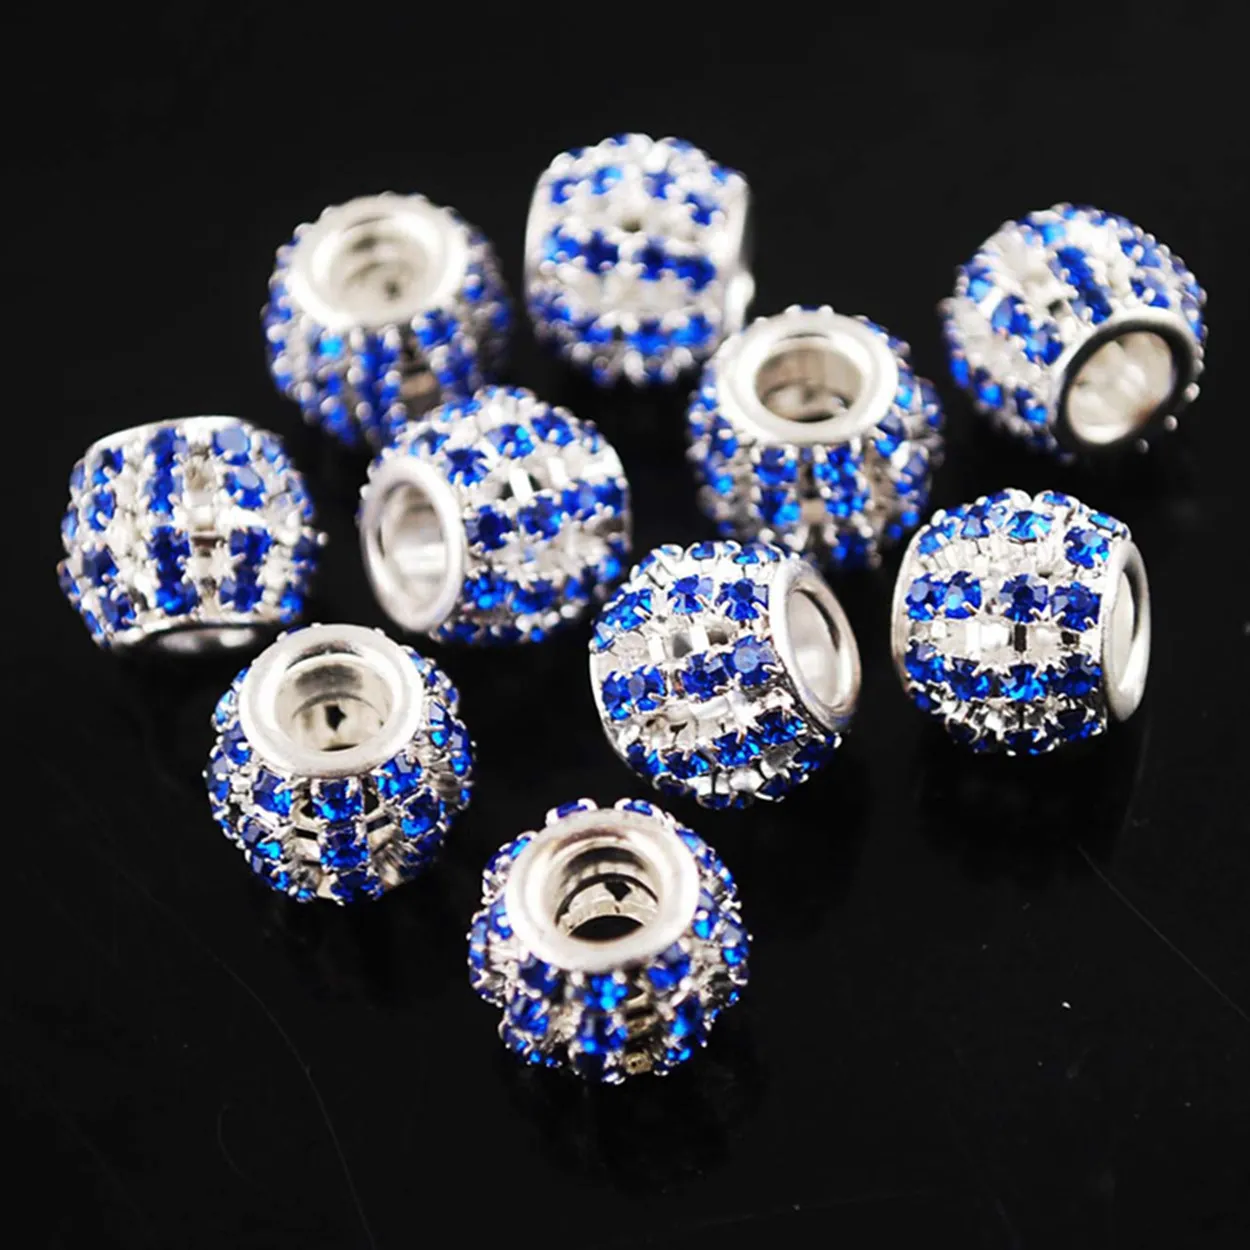 5pcs Oval Crystal Rhinestone Charms Findings Loose Big Hole Beads 12X10mm Craft 